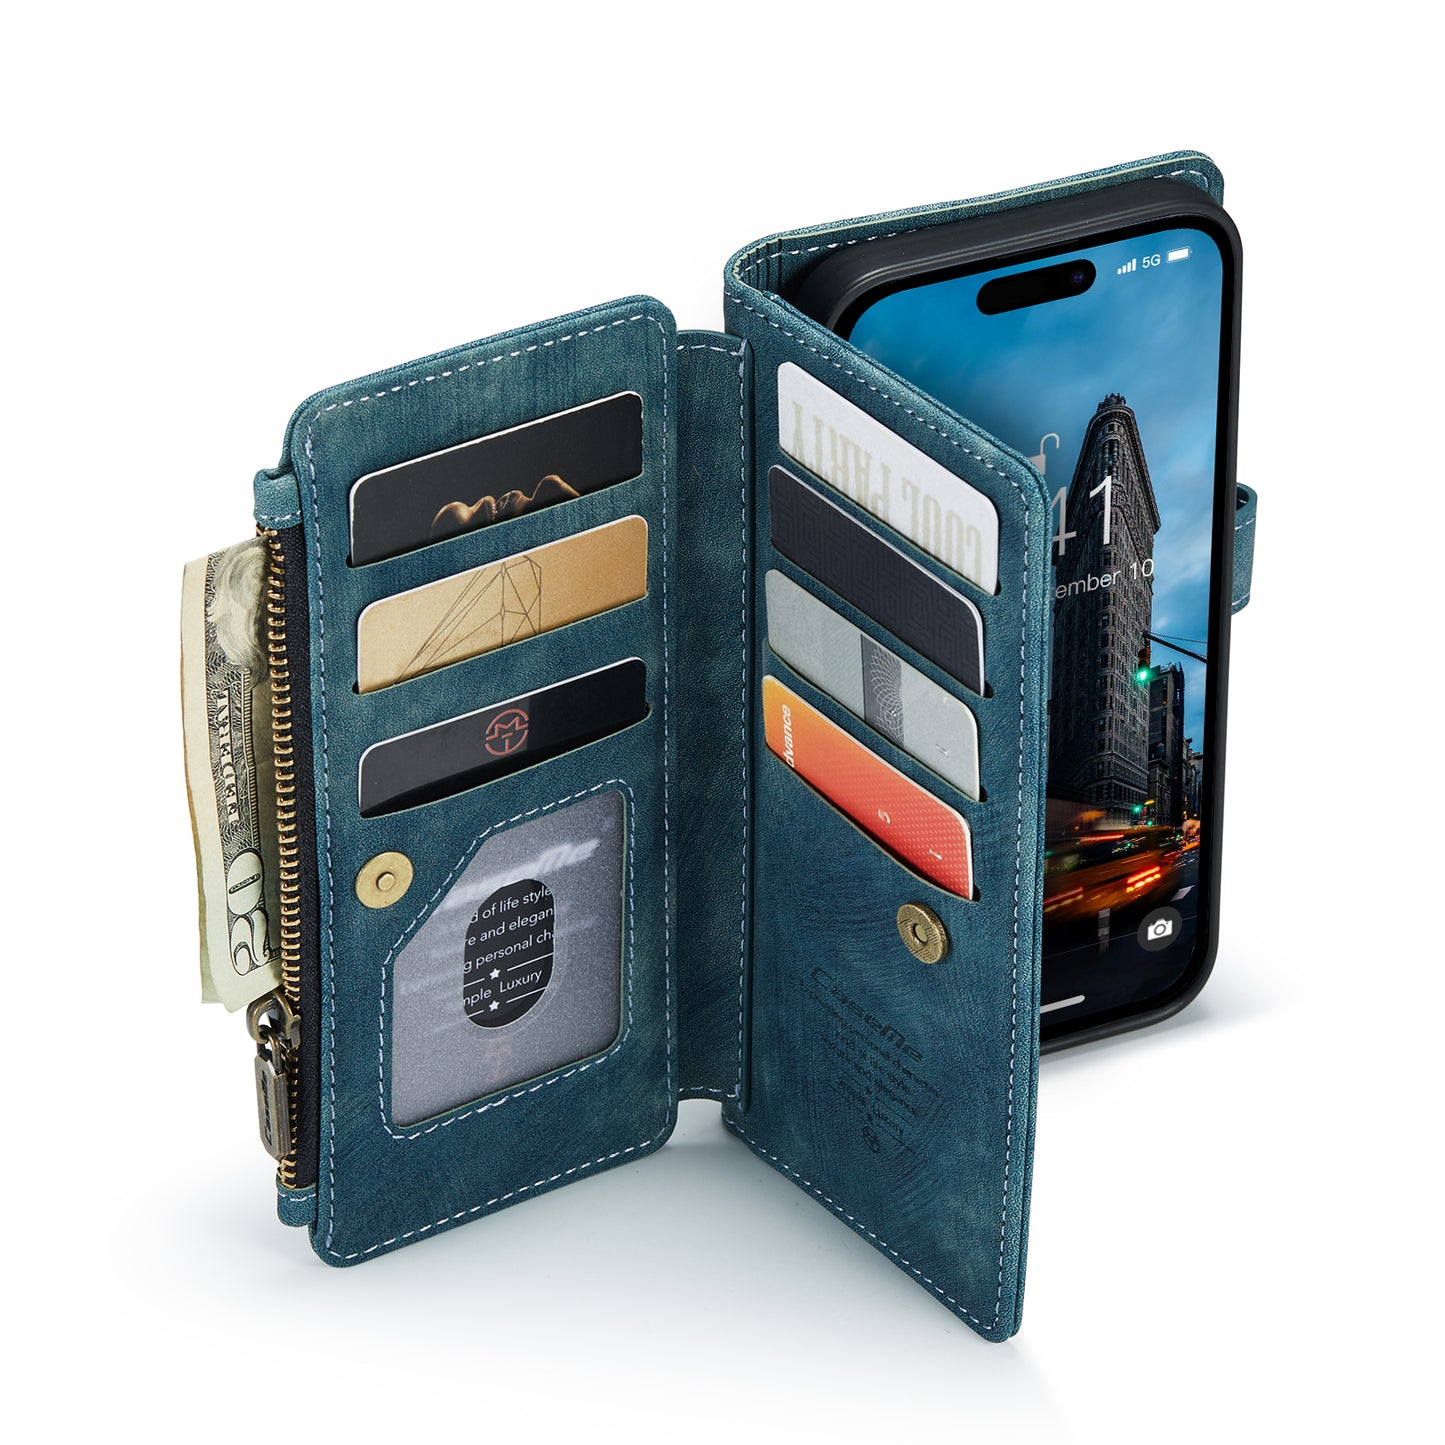 3-in-1 Functionality Durable Wallet  Case for iPhone (Blue)